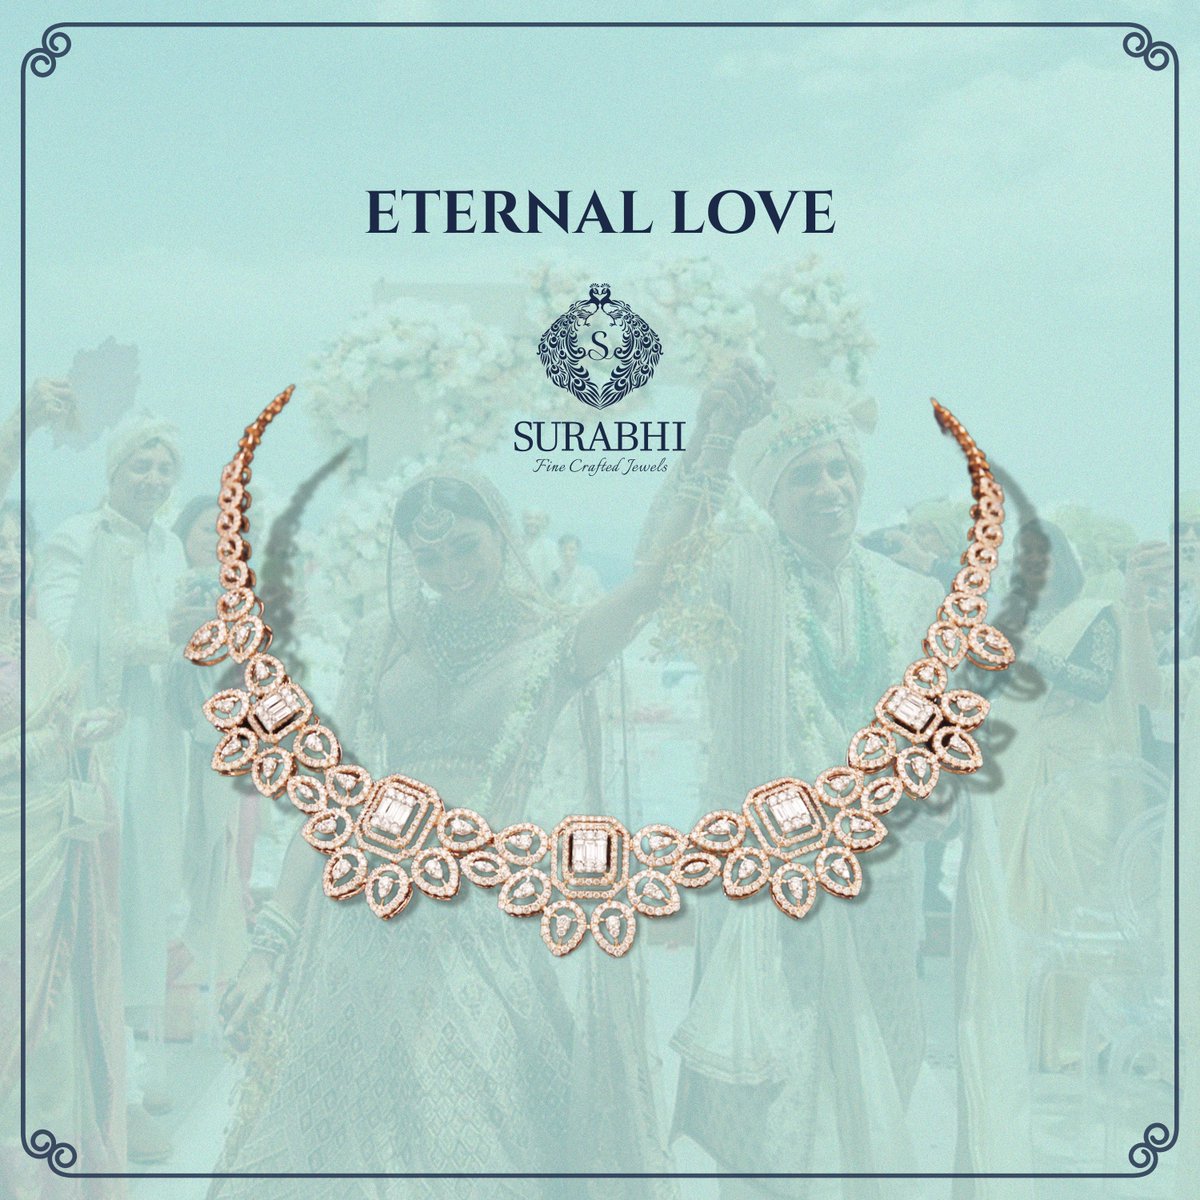 Elegance defined: Adorn yourself with the timeless beauty of Surabhi Fine Crafted Jewels' exquisite necklace, a masterpiece that captures hearts and enhances every moment.

@surabhifinecraftedjewels

#surabhifinecraftedjewels #necklace #necklacecollection #diamondjewellery